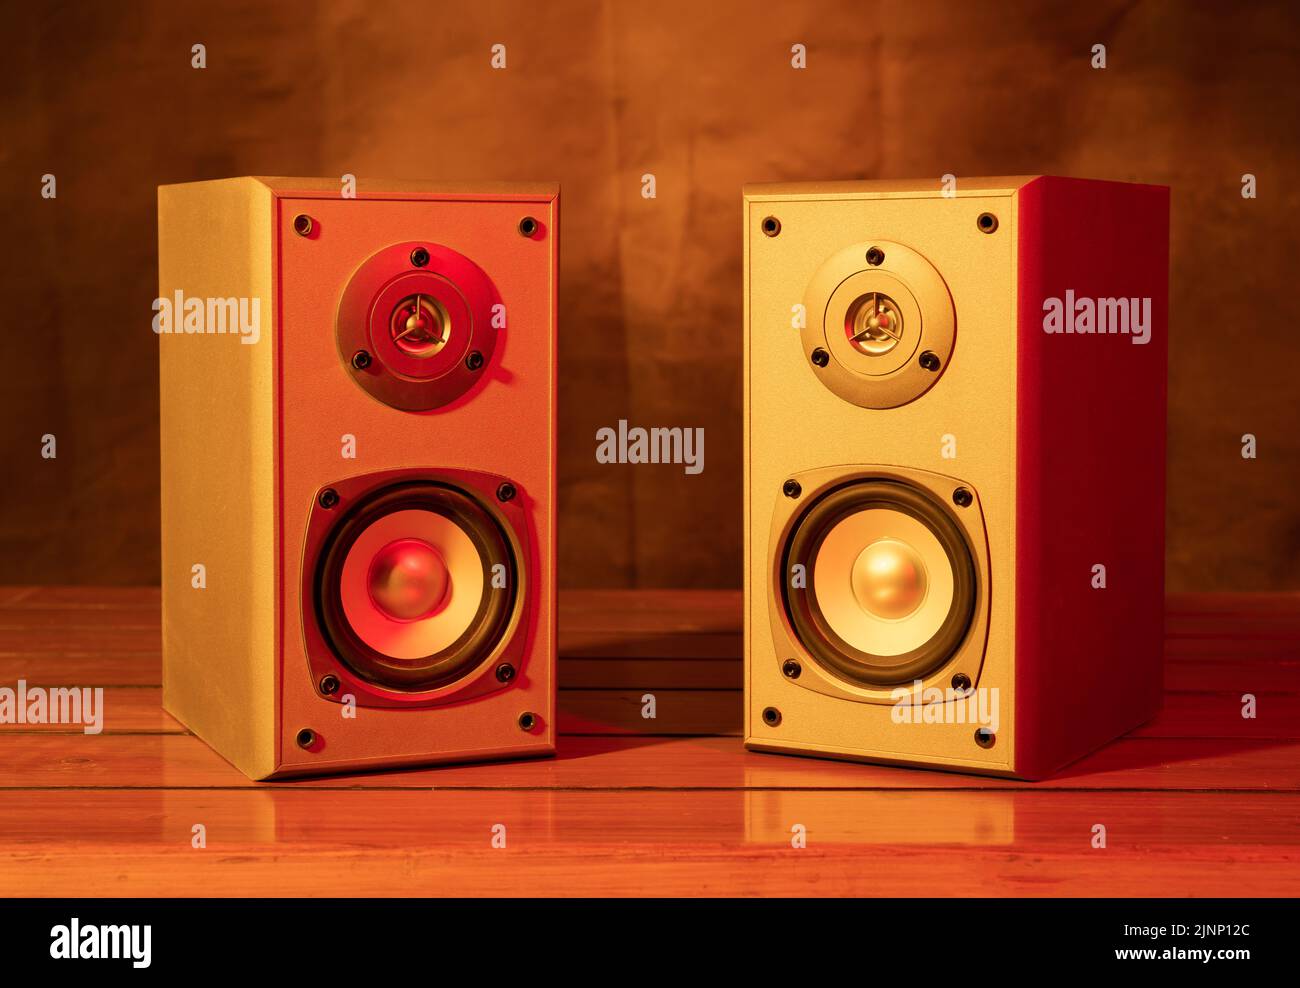 Two audio speakers with yellow and red bar lights closeup view. Stock Photo